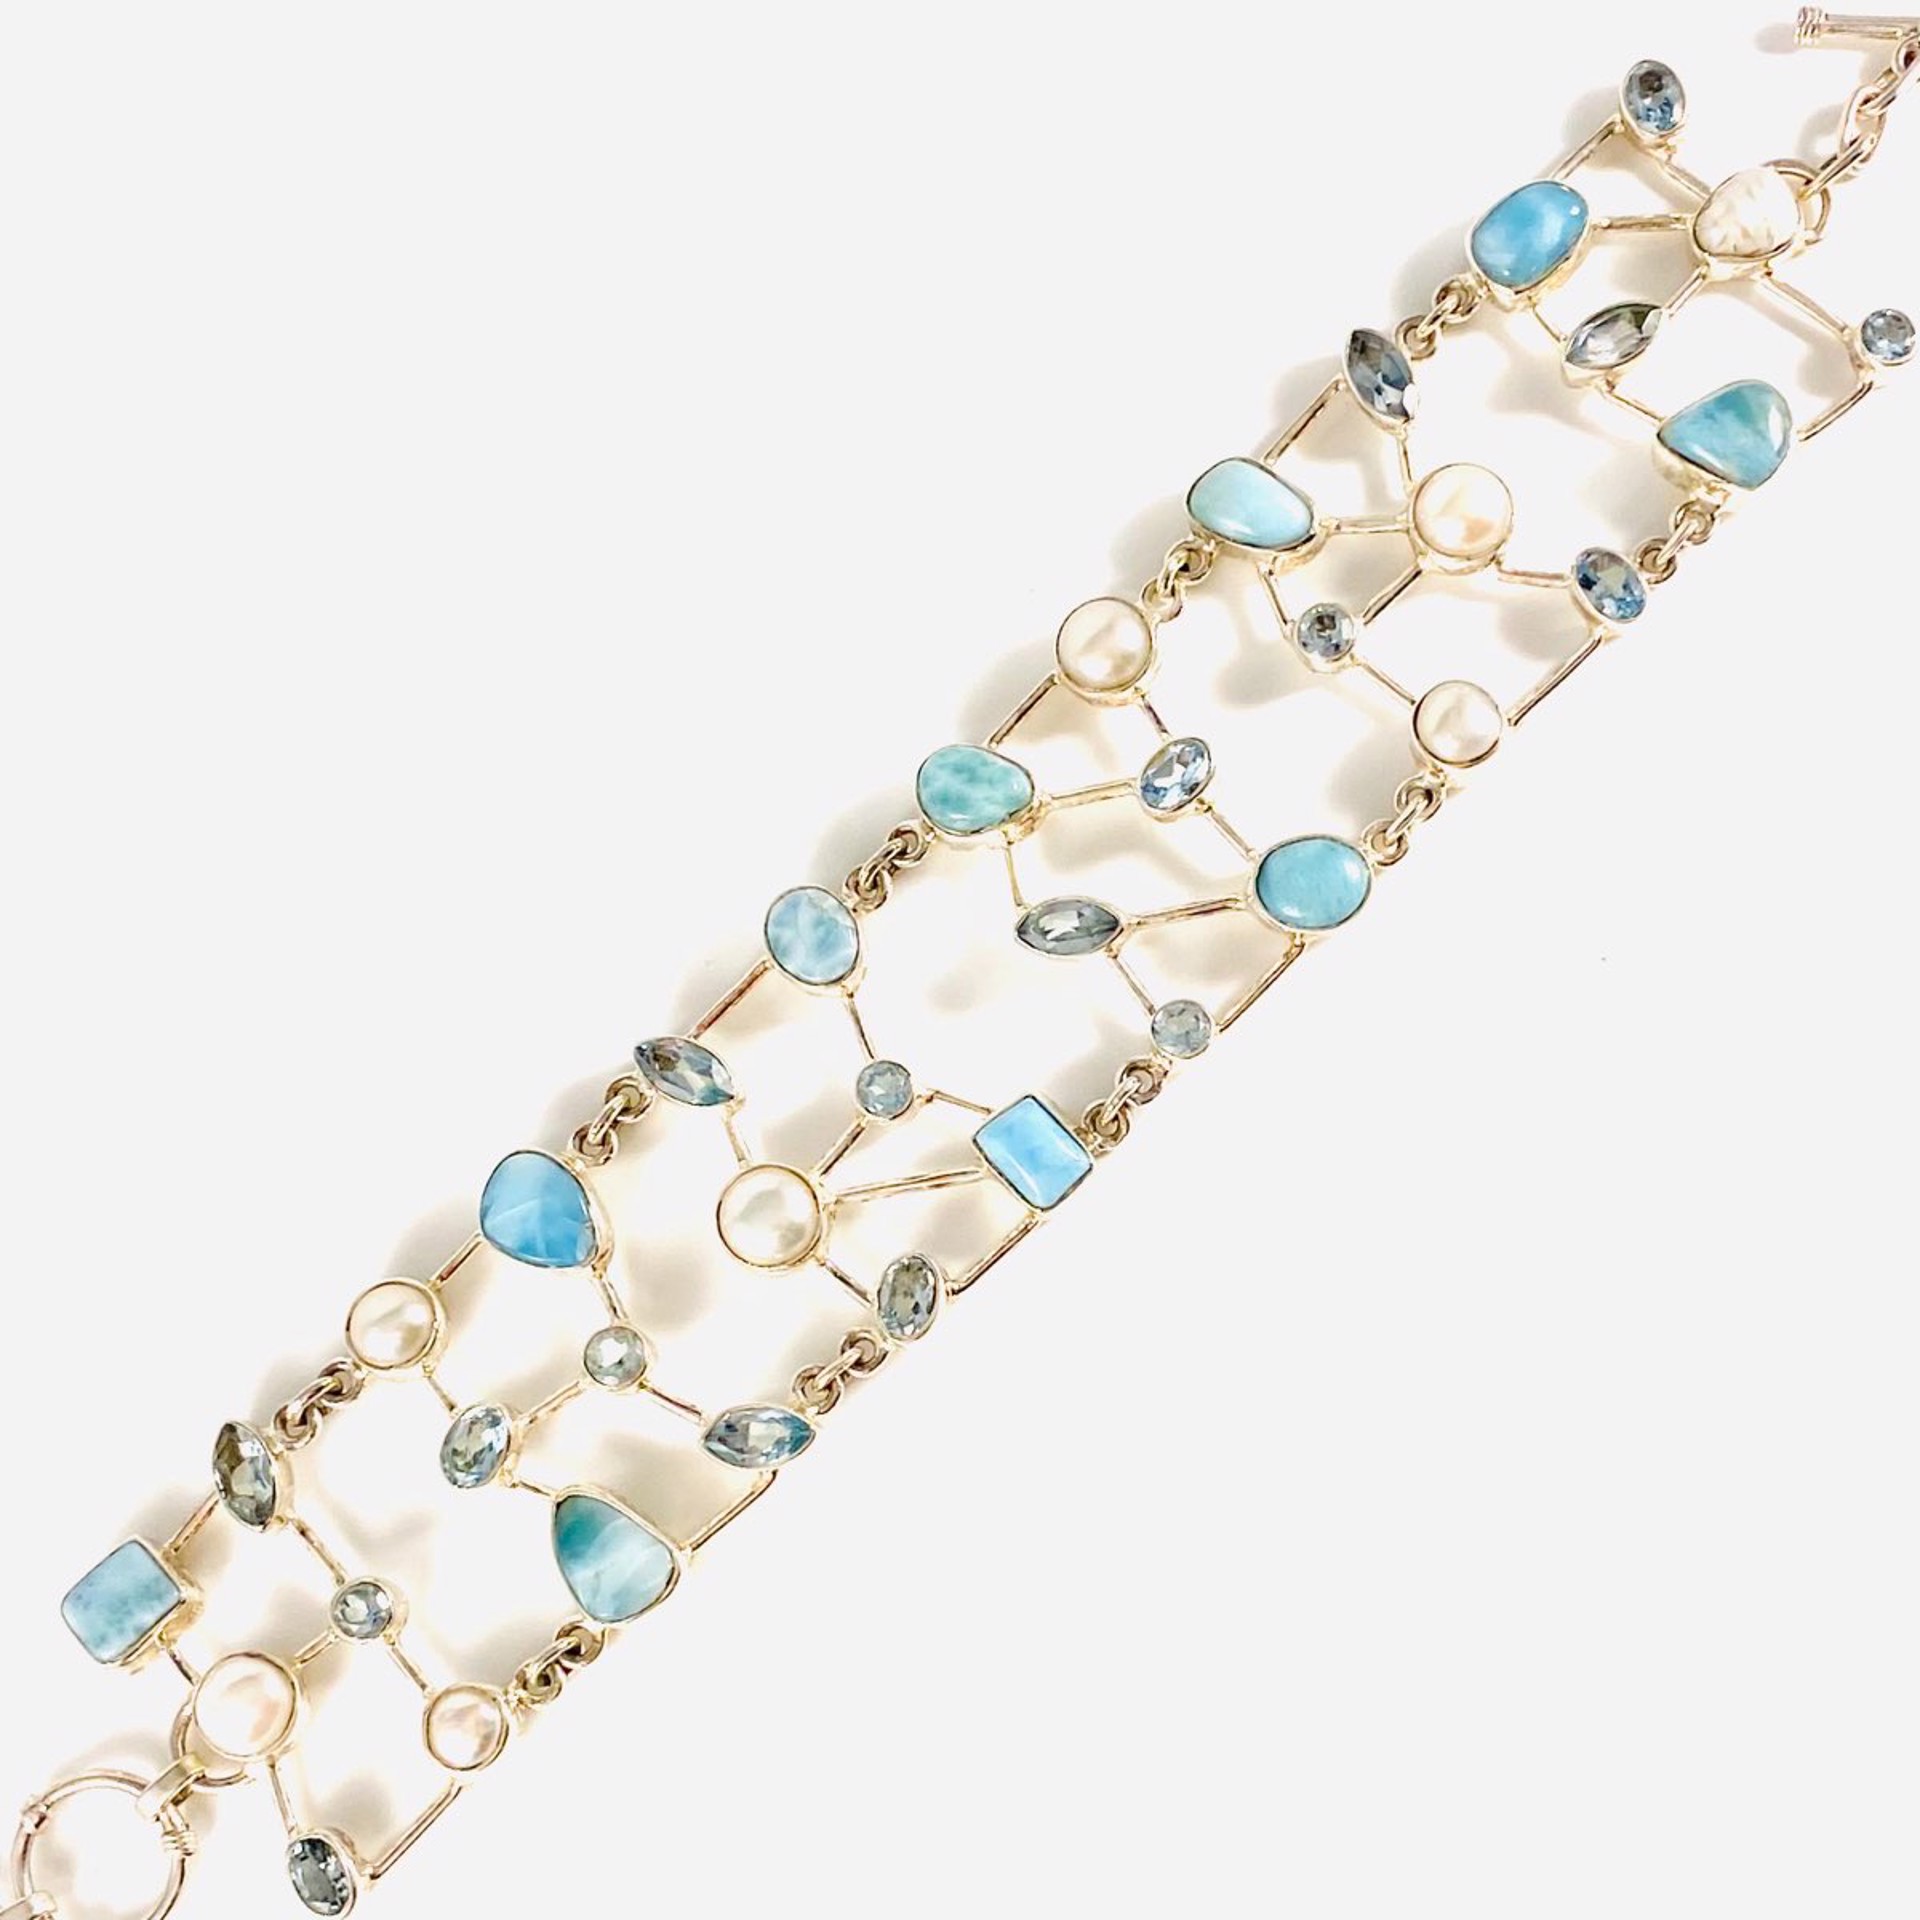 MON22-SB 876 One of A Kind Larimar Blue Topaz Pearl Bracelet with 1.5" ext by Monica Mehta